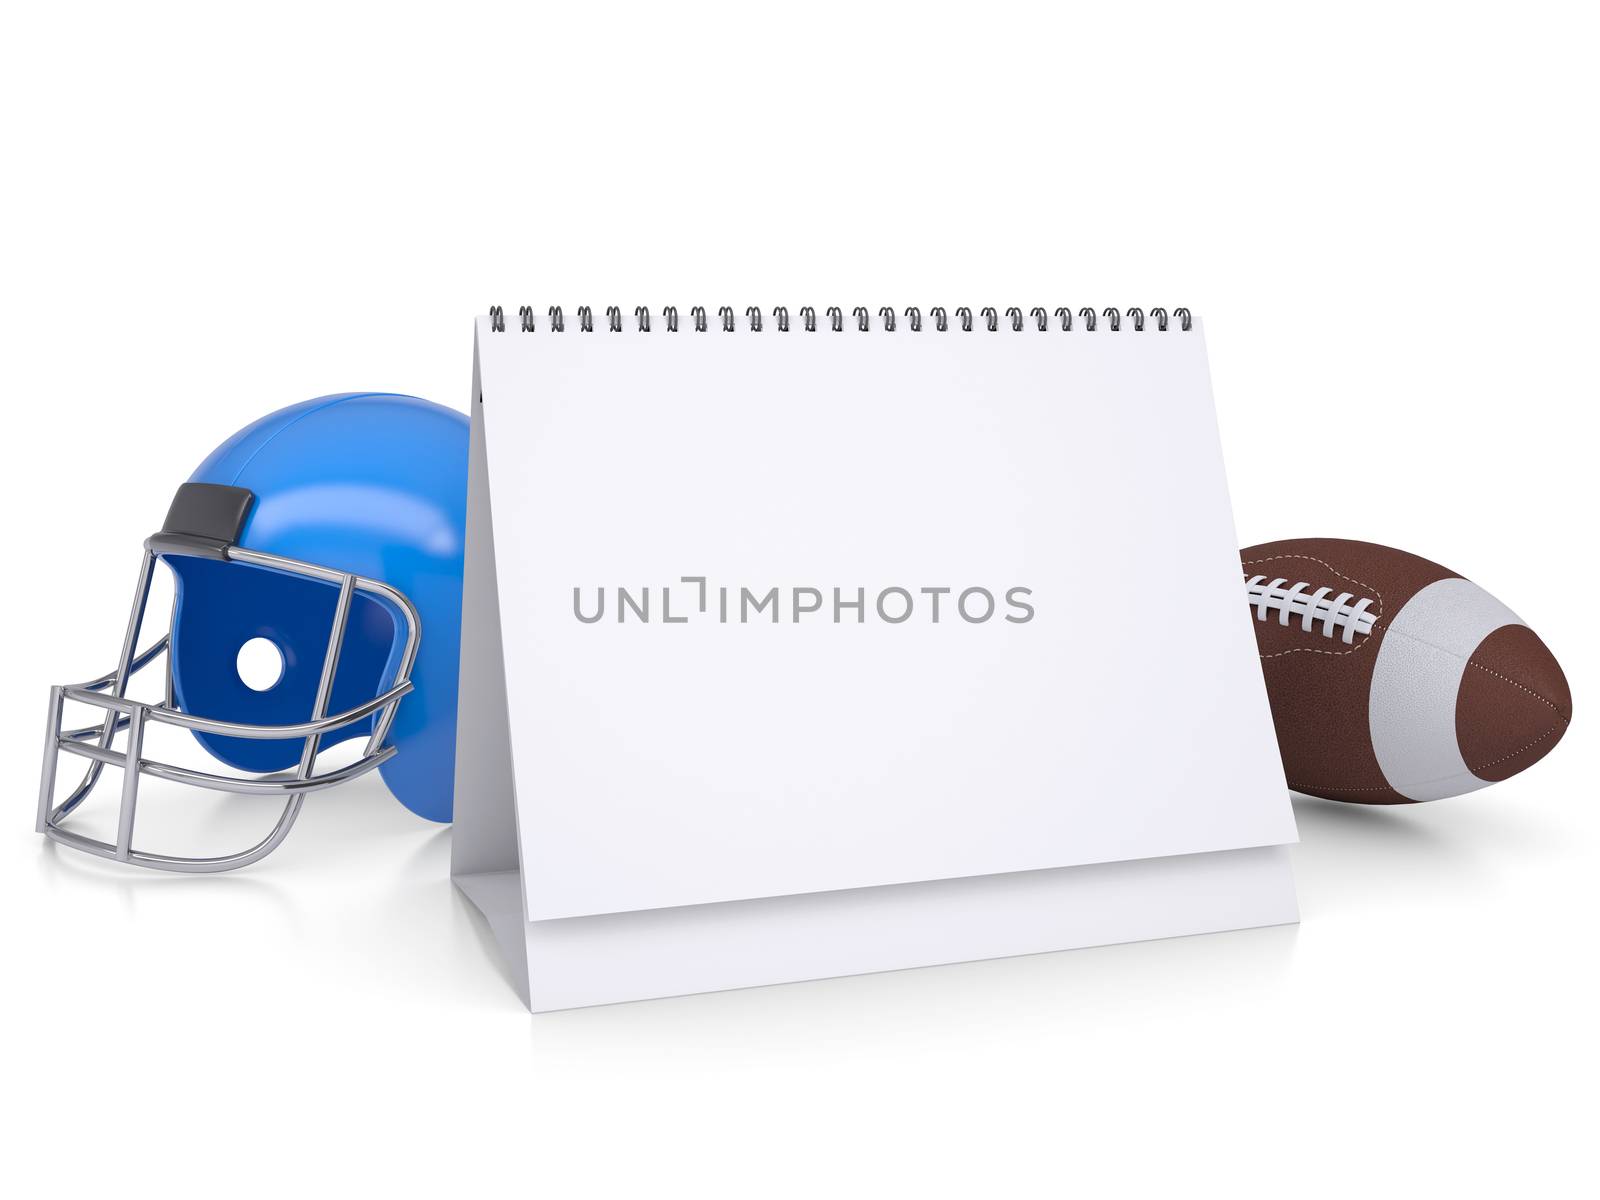 Desktop calendar, a football helmet and ball. Isolated render on a white background